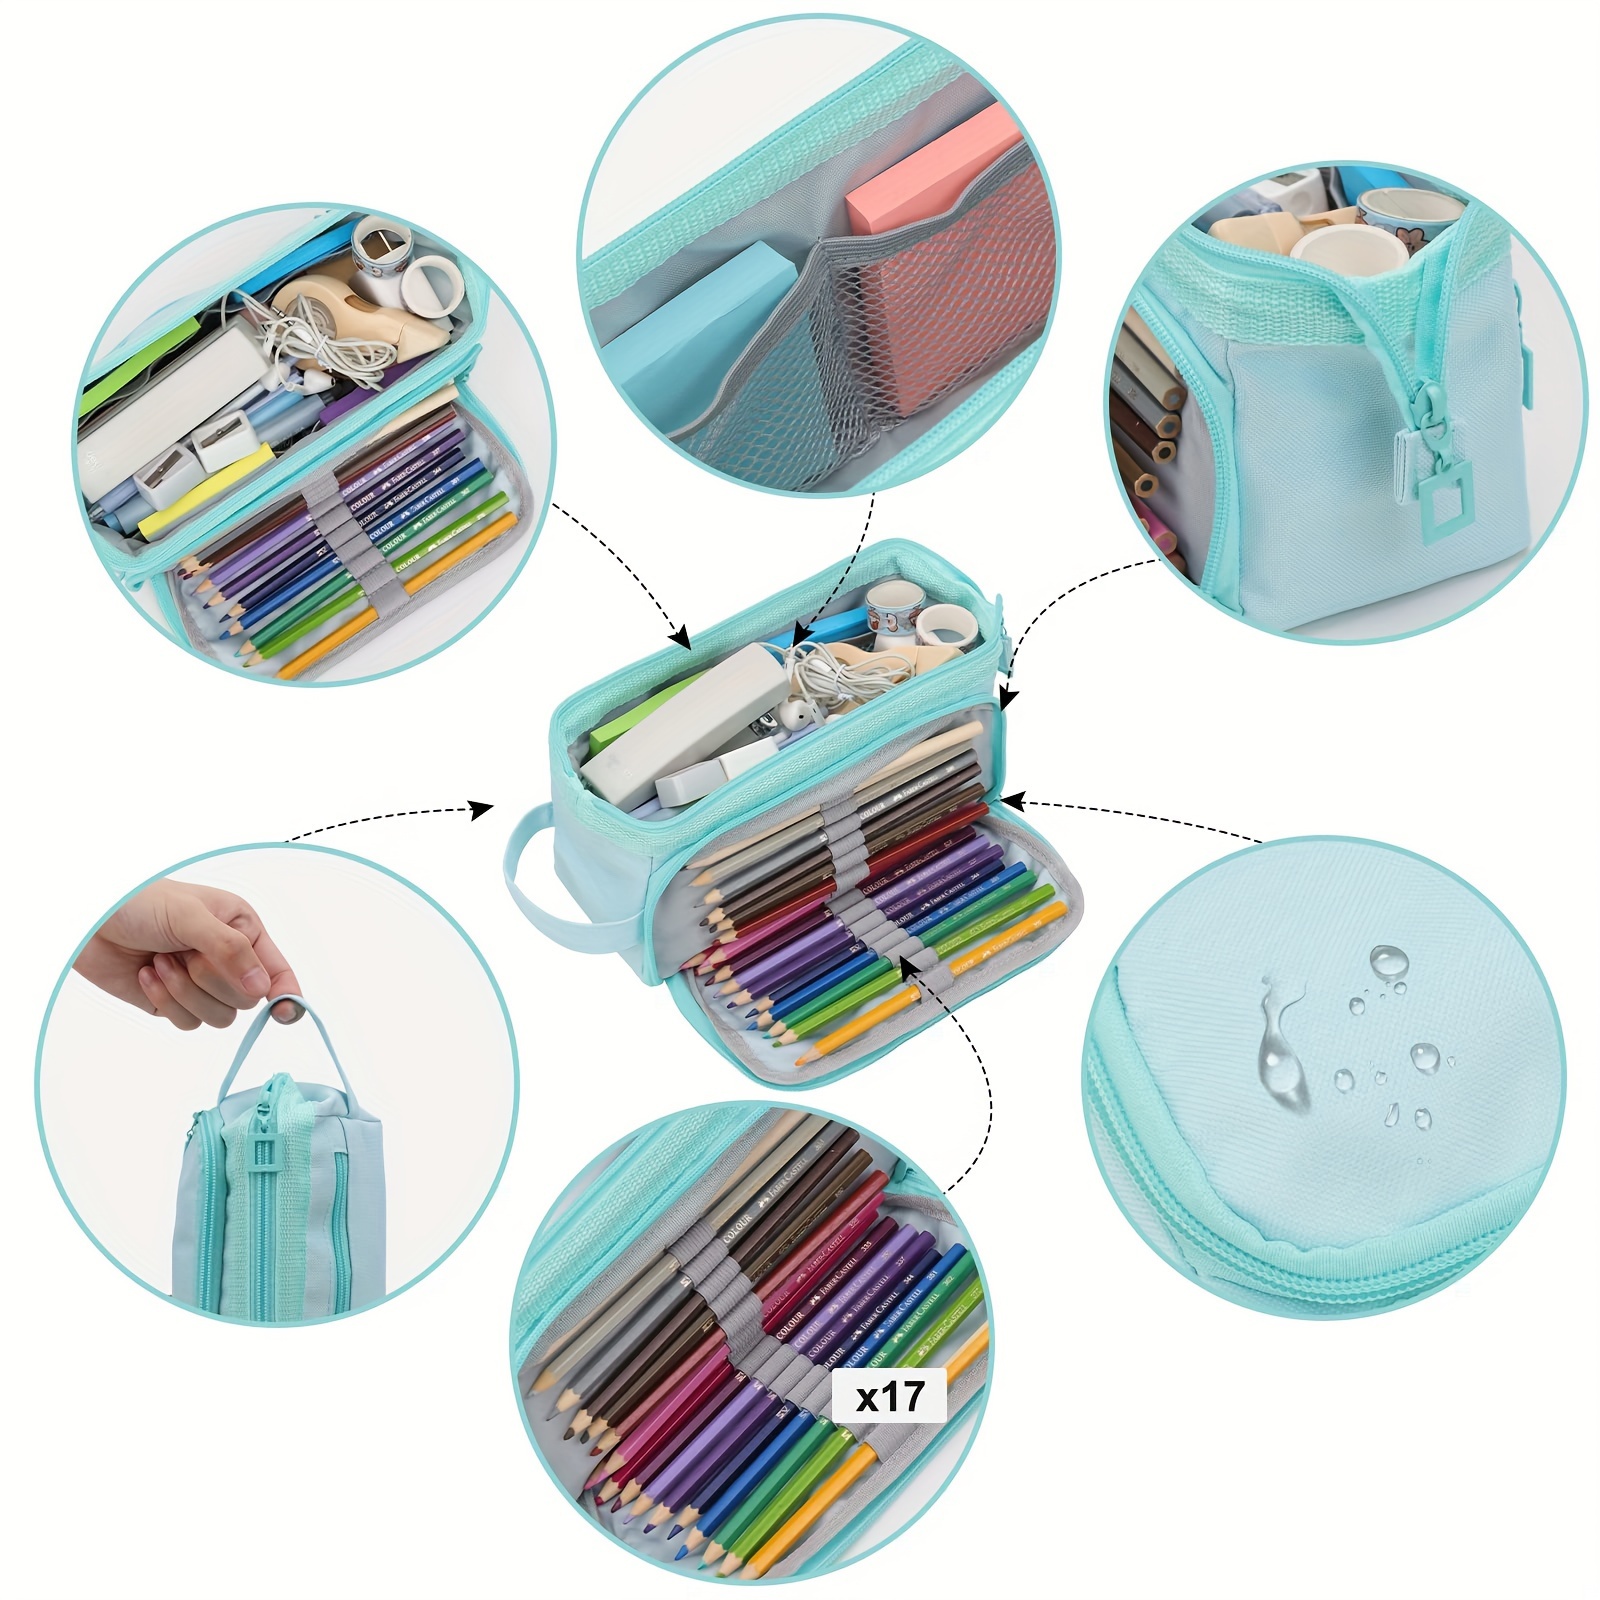 EOOUT Pencil Case Big Capacity Office College School Pencil Pouch Large  Storage High Capacity Bag Pouch Holder Box Organizer Light Blue